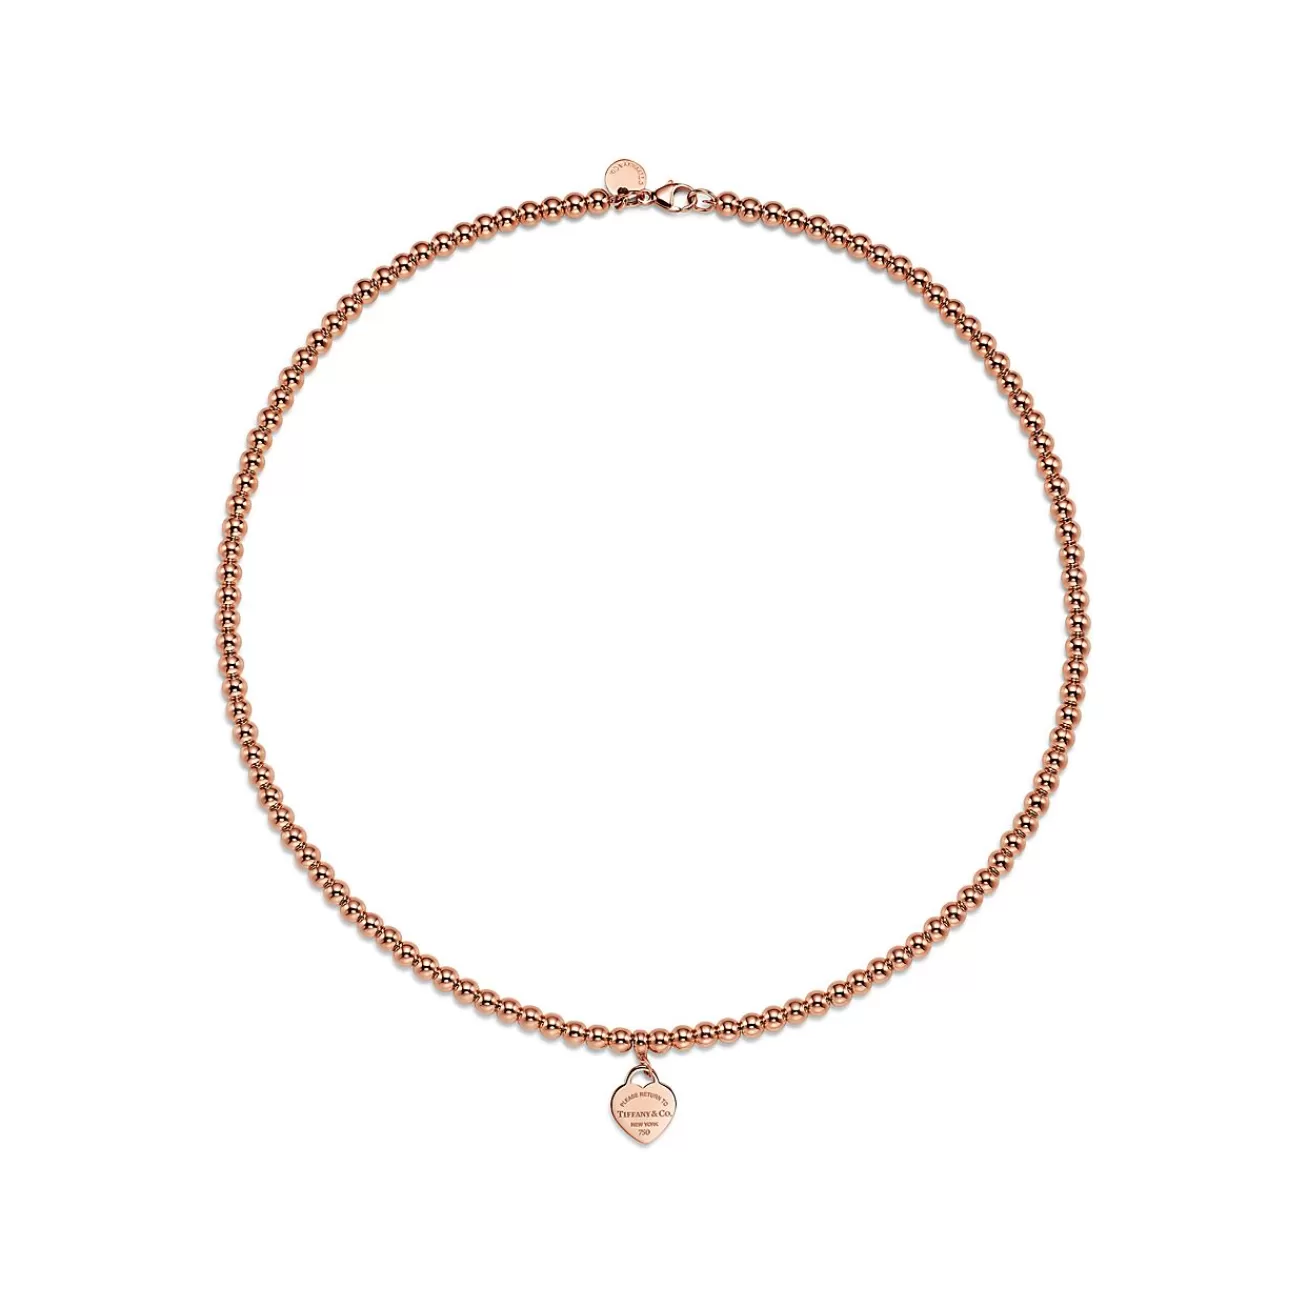 Tiffany & Co. Return to Tiffany® Heart Tag Bead Necklace in Rose Gold, Mini | ^ Necklaces & Pendants | Rose Gold Jewelry